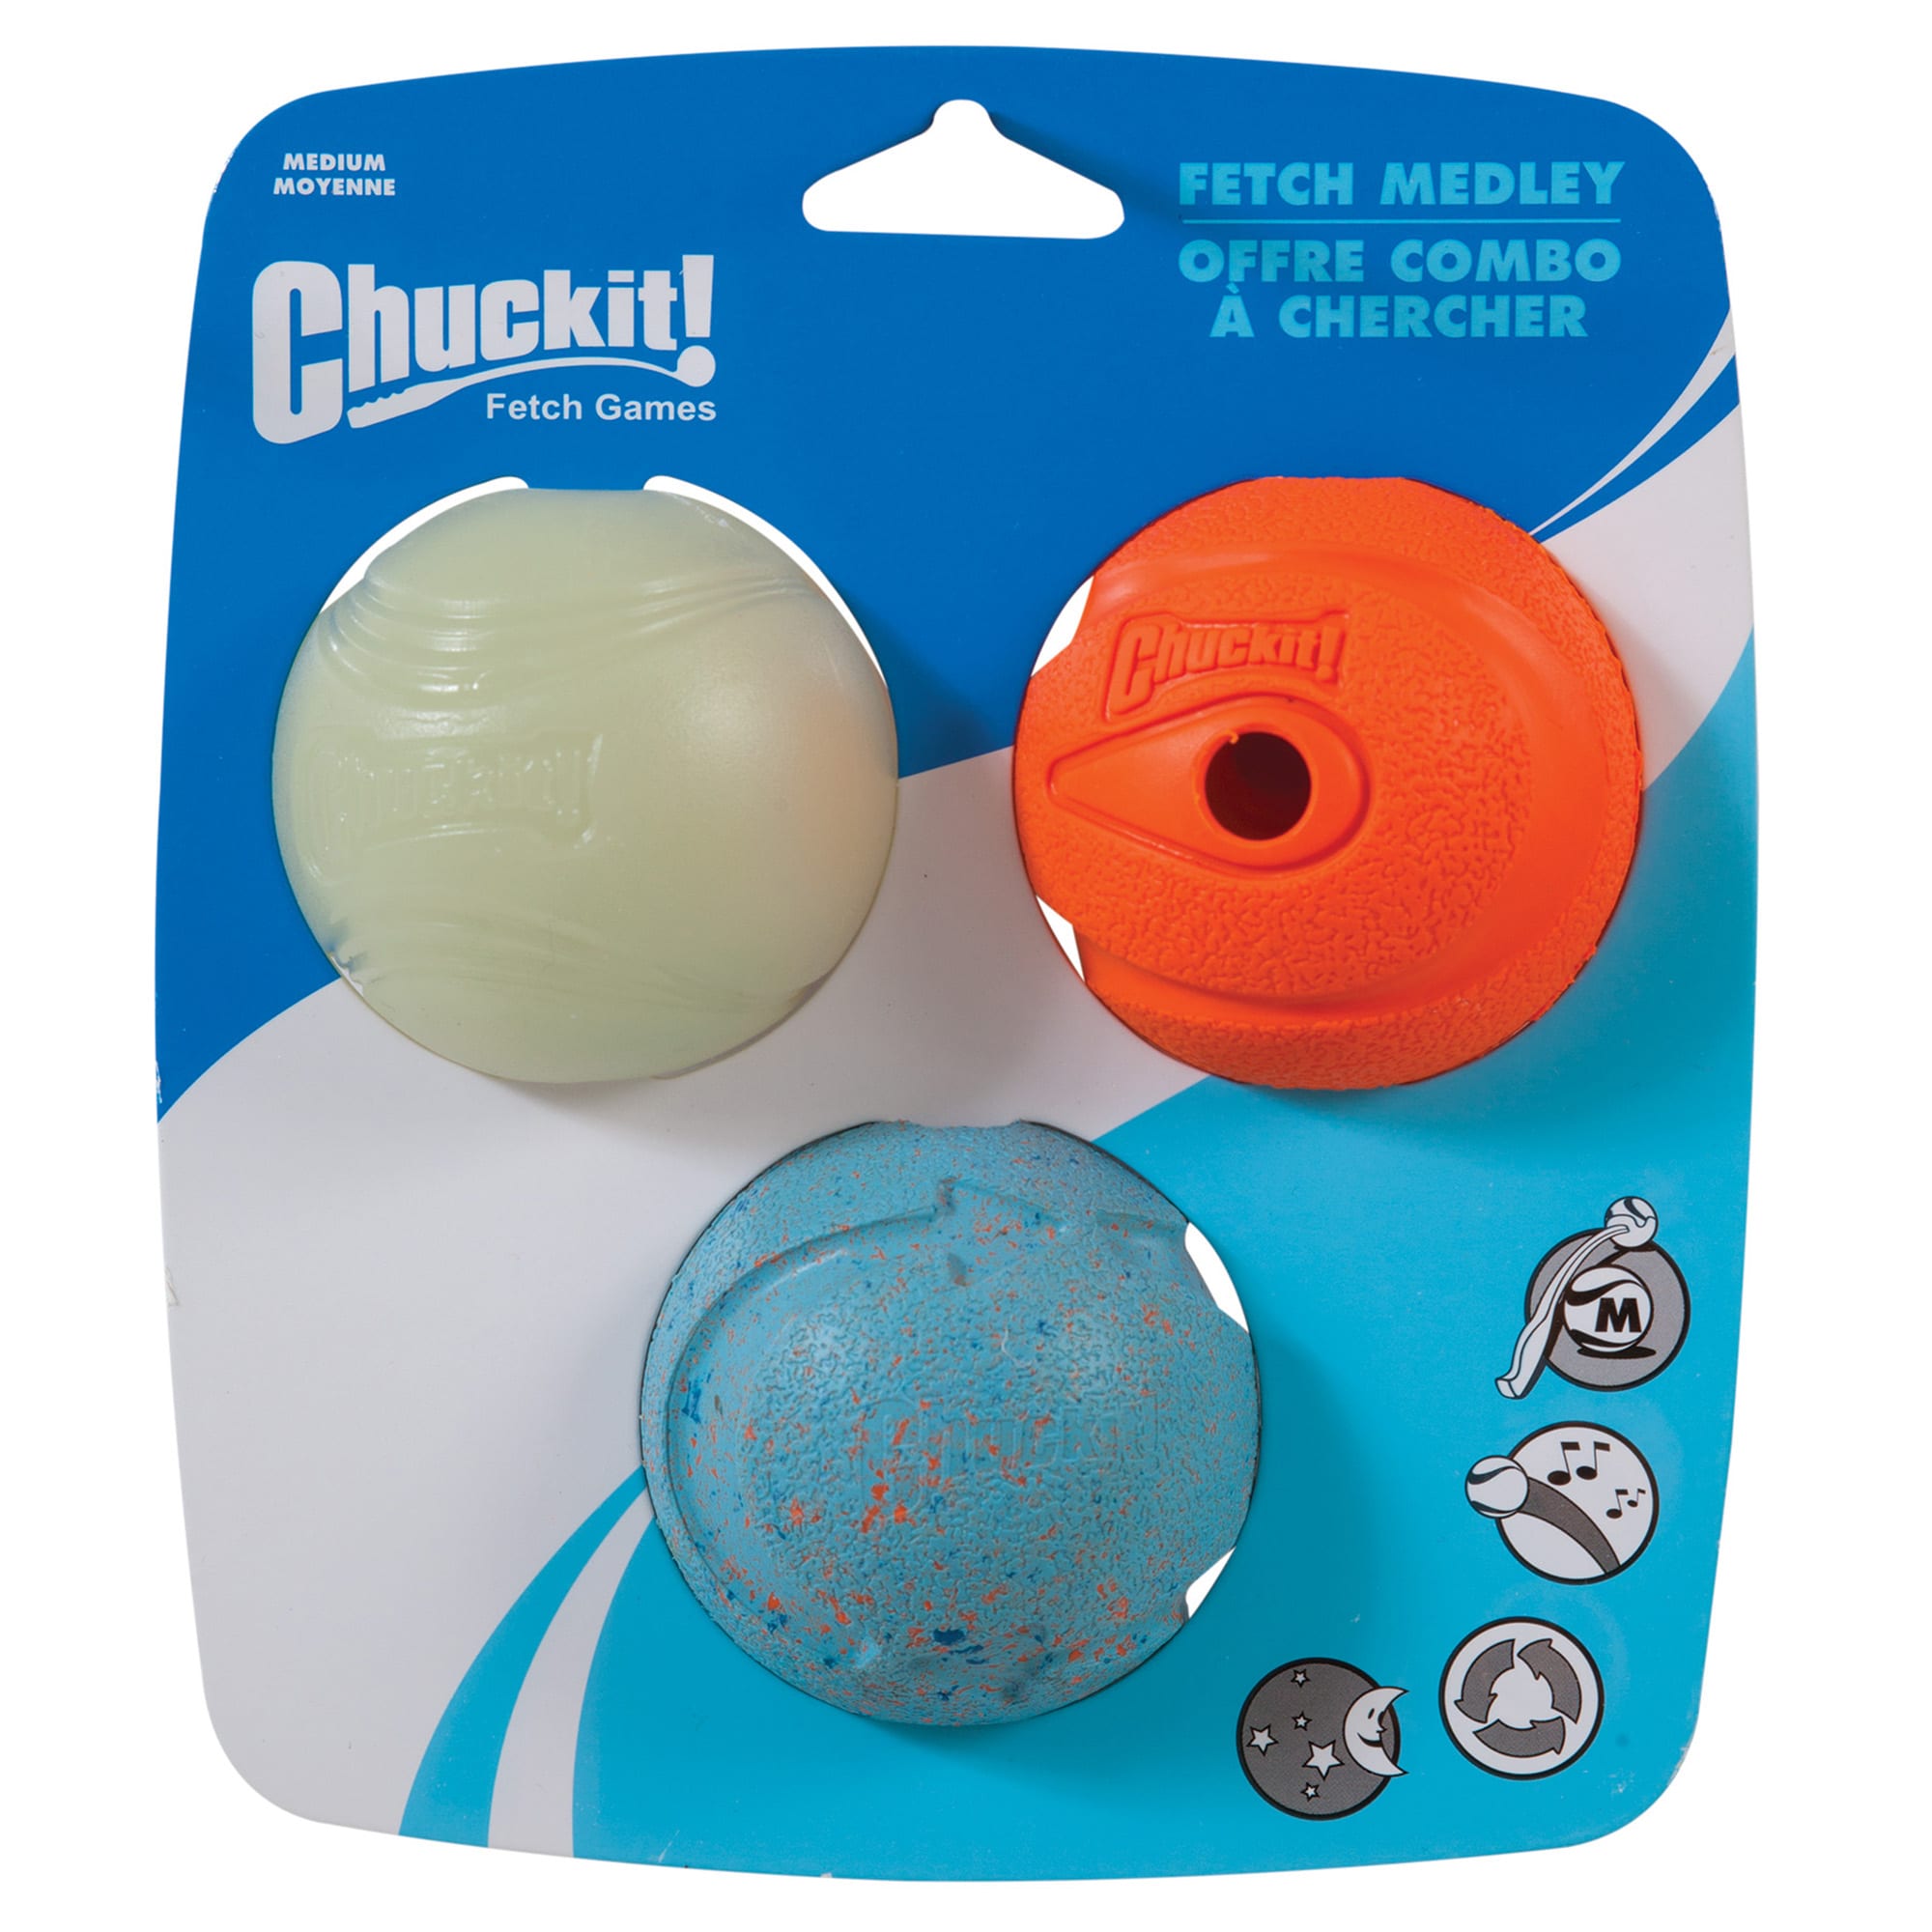 FETCH BALL DOG TOY 2 Pack For medium Launcher Chuckit 